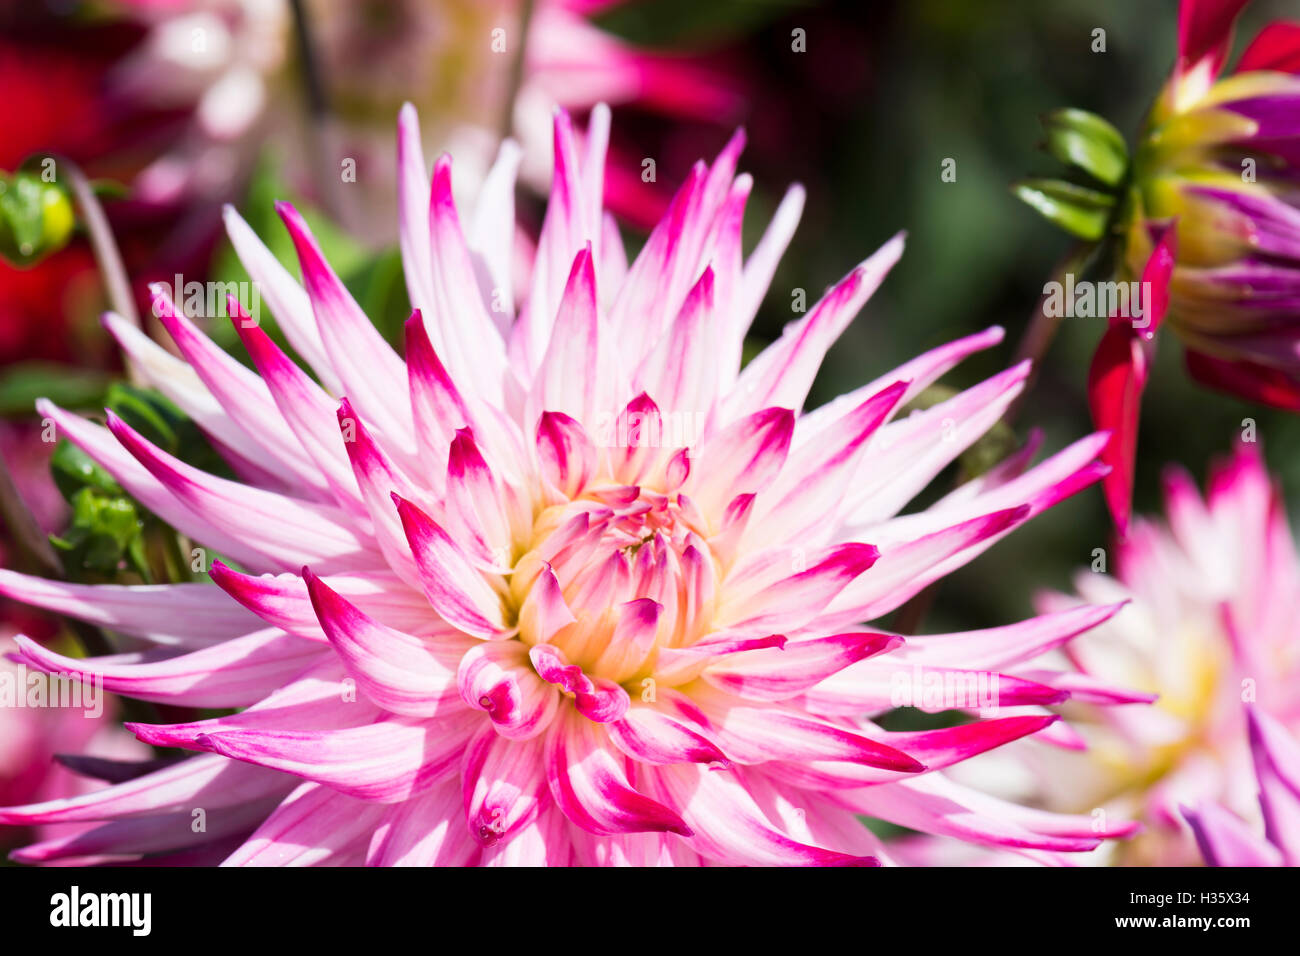 Spiky pink dahlia flowers with graduated petals. Stock Photo